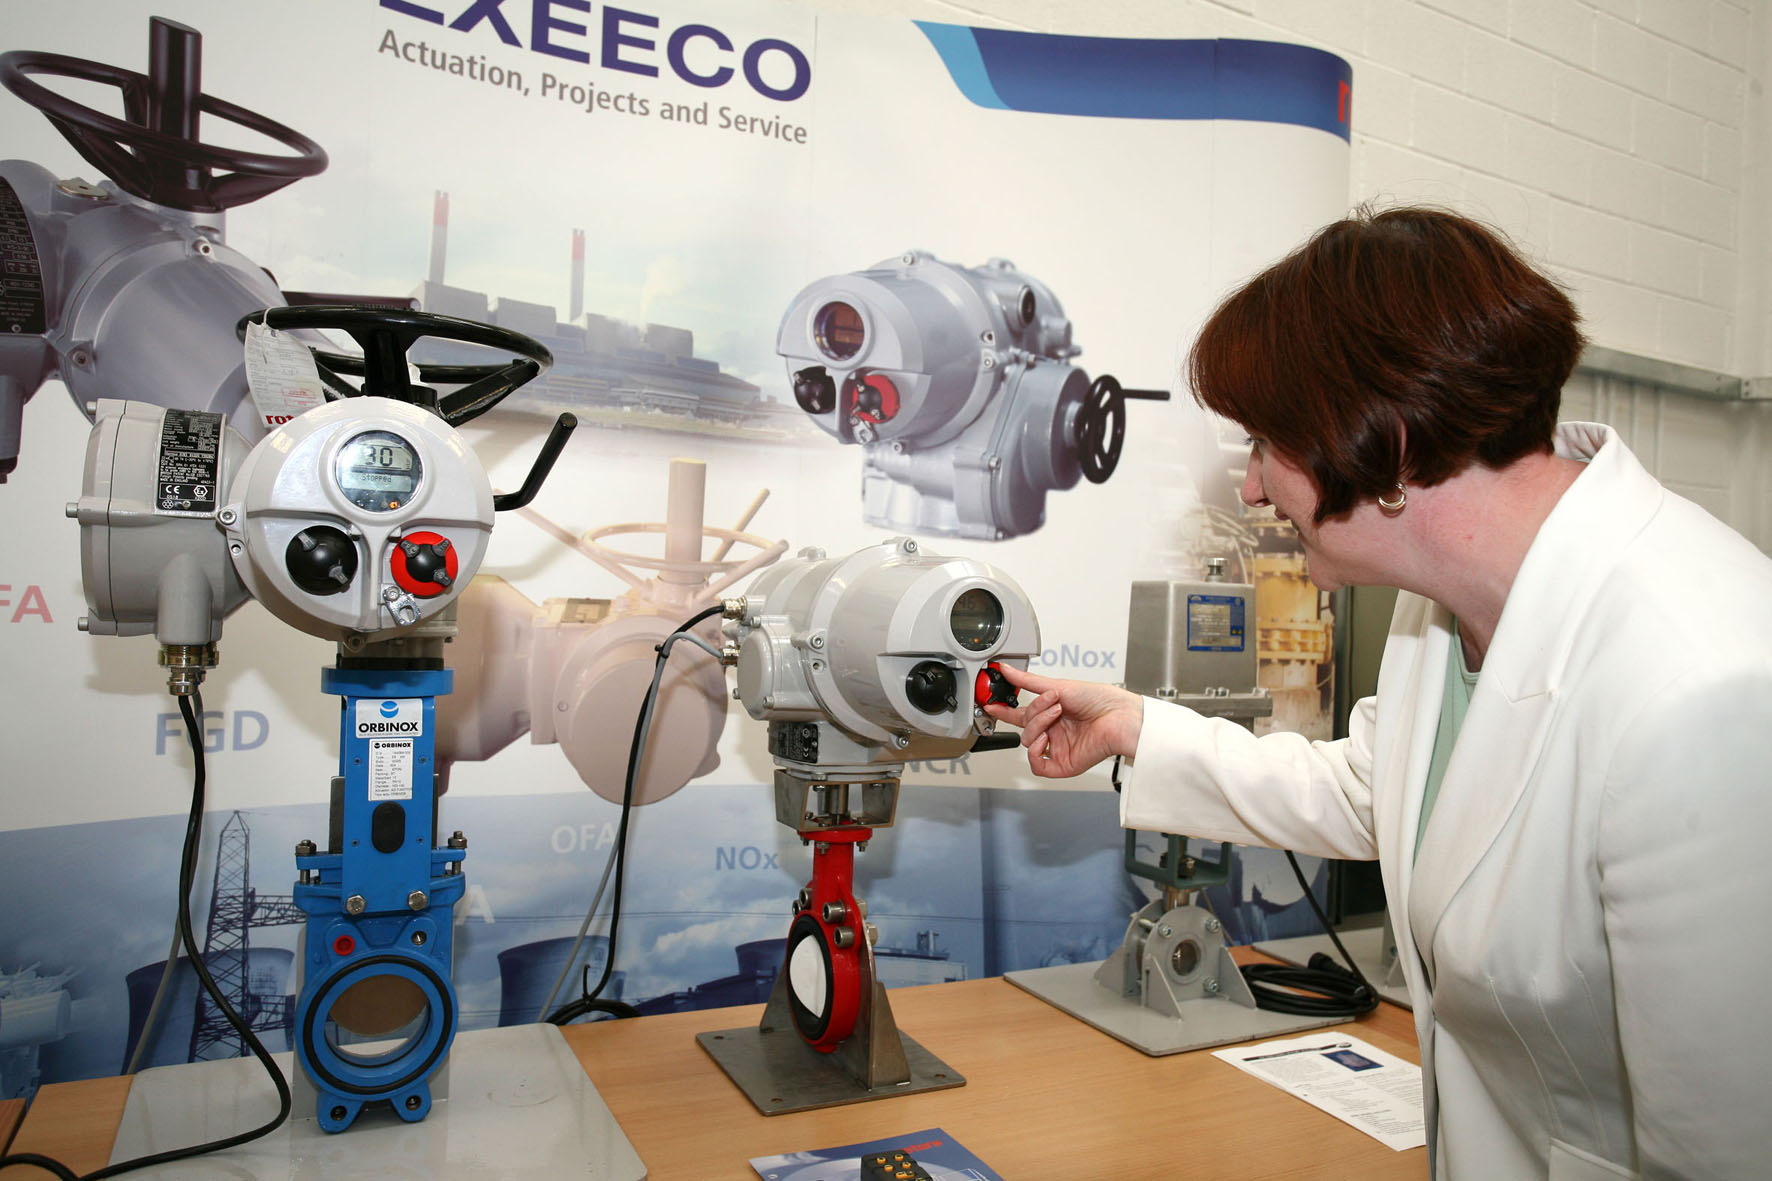 Exeeco puts on a show at new British Energy training centre